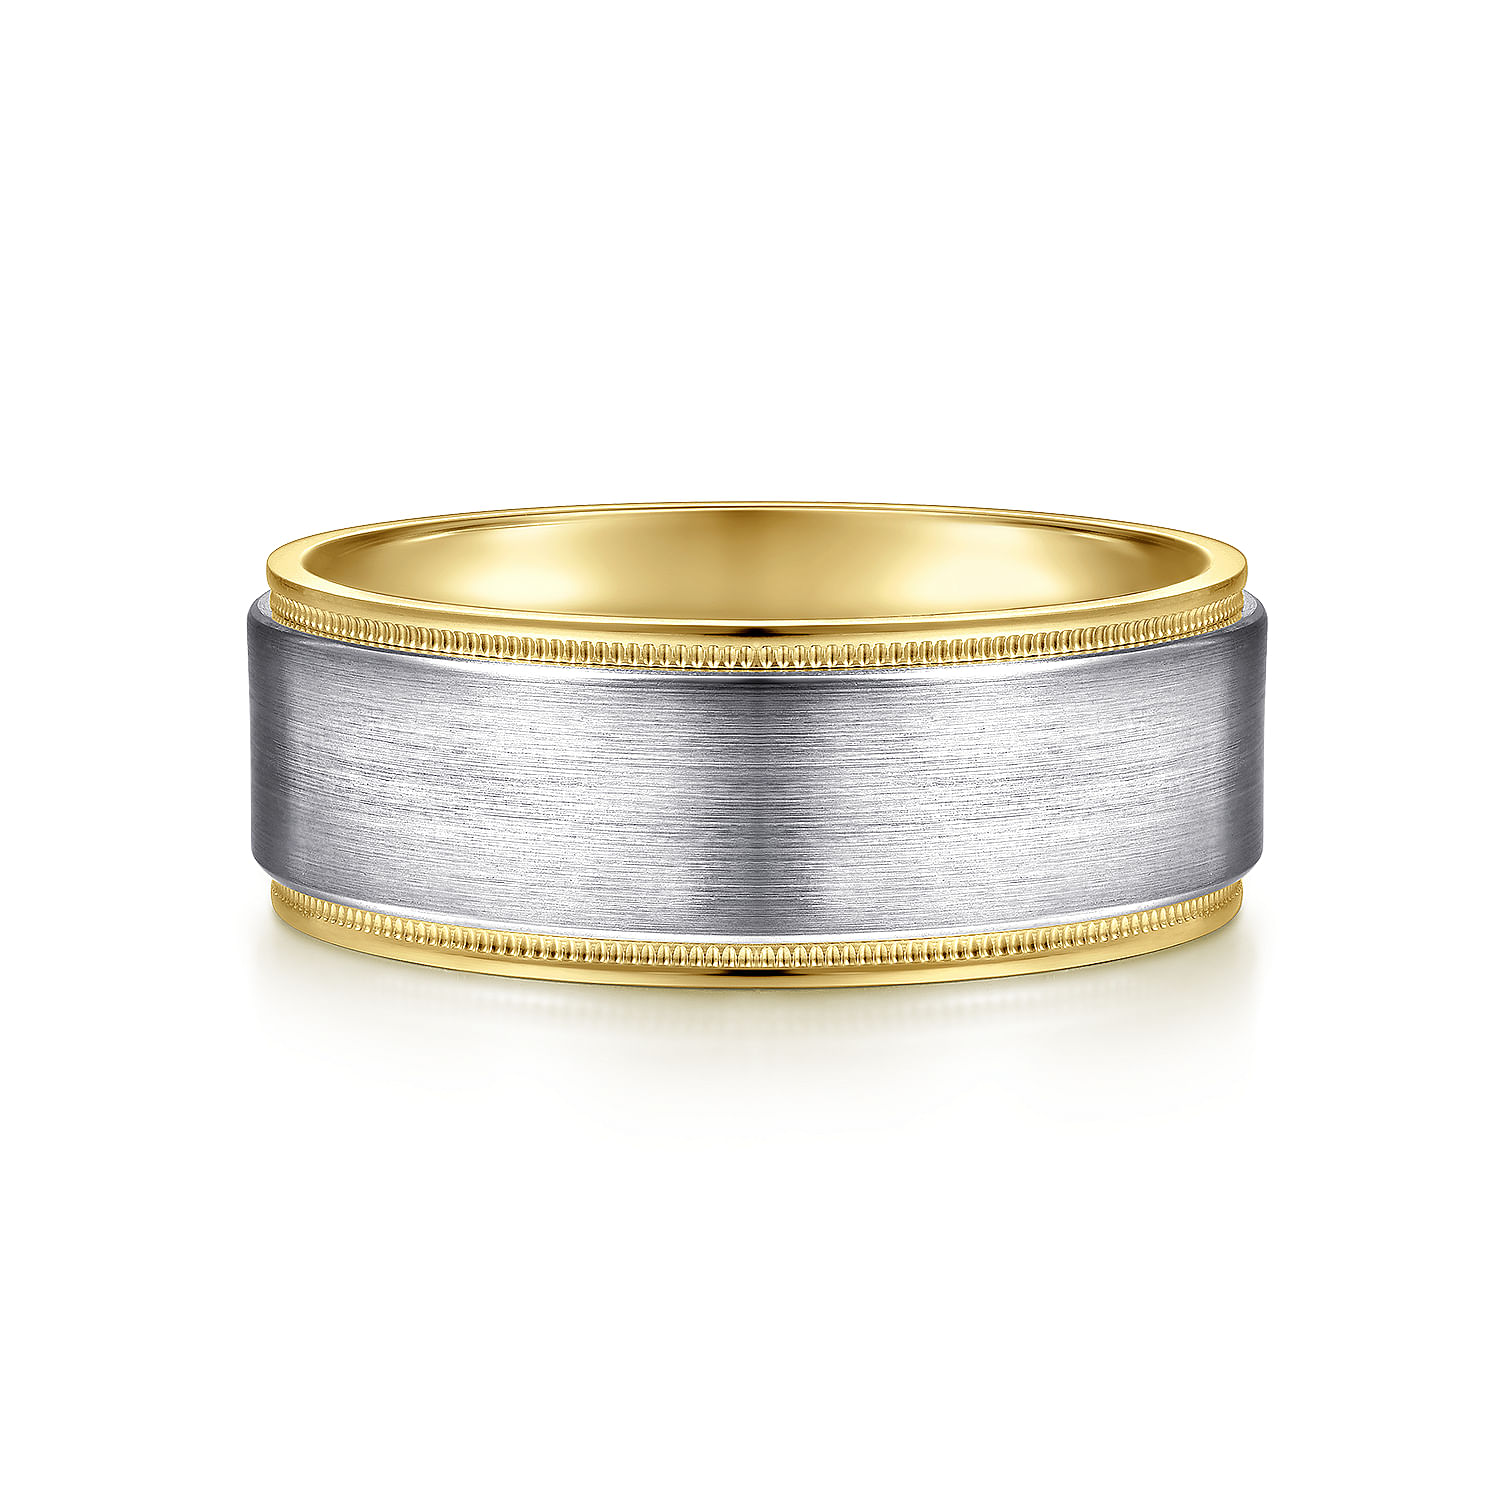 Liam - 14k Yellow & white Gold 8mm Wide Band Exclusive Mens Wedding Band  @$2275 | Gabriel & Co